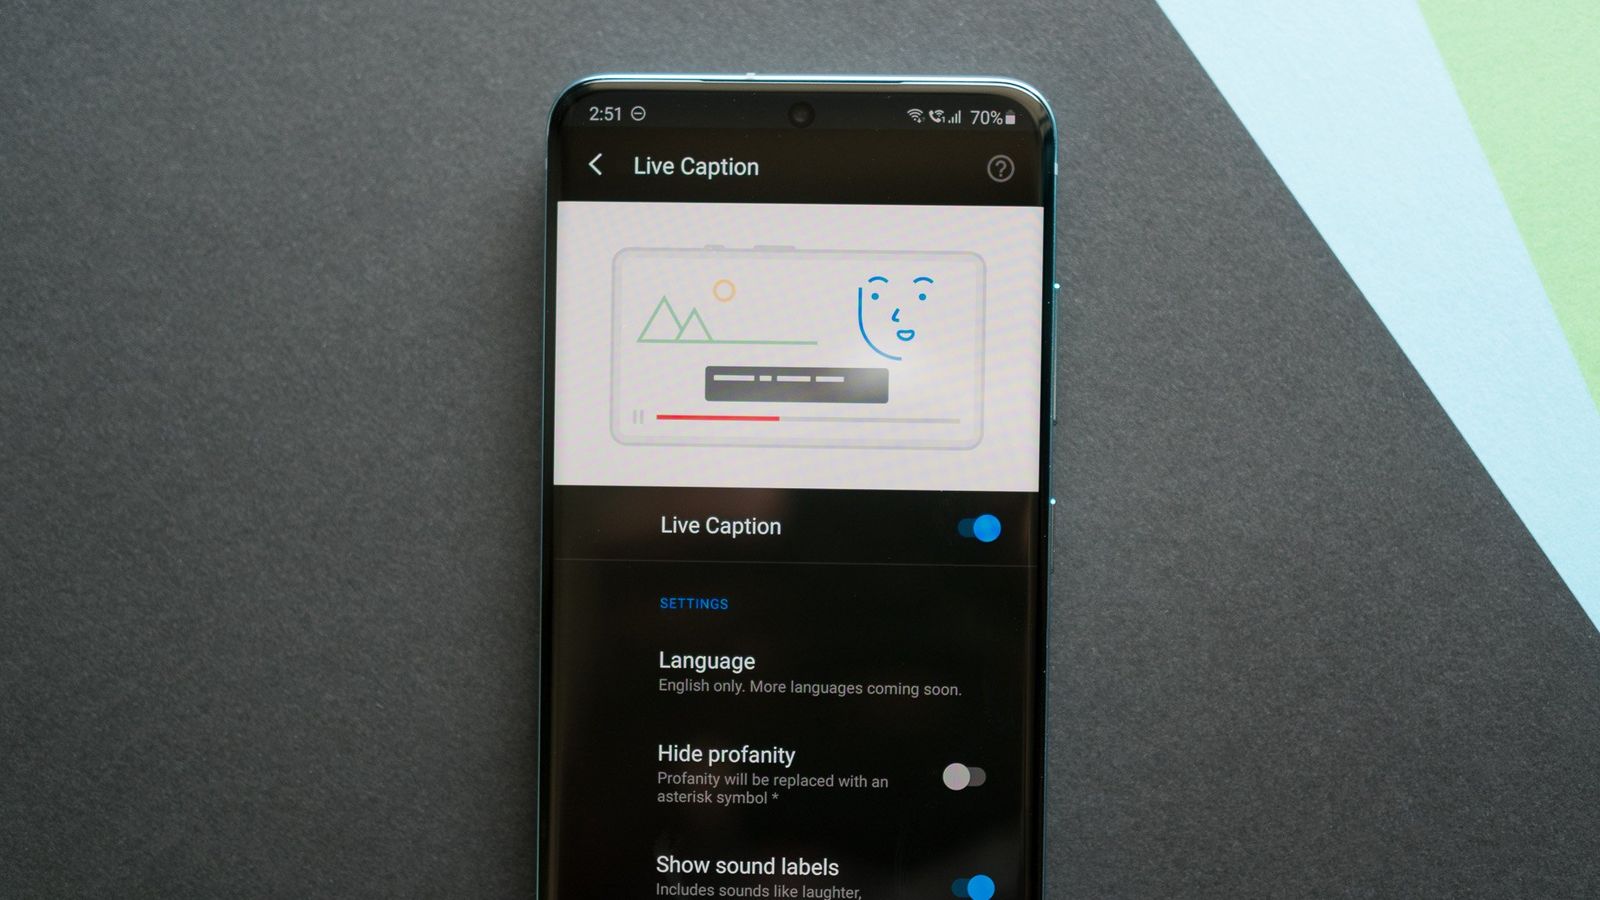 How to turn on Live Caption on the Galaxy S20